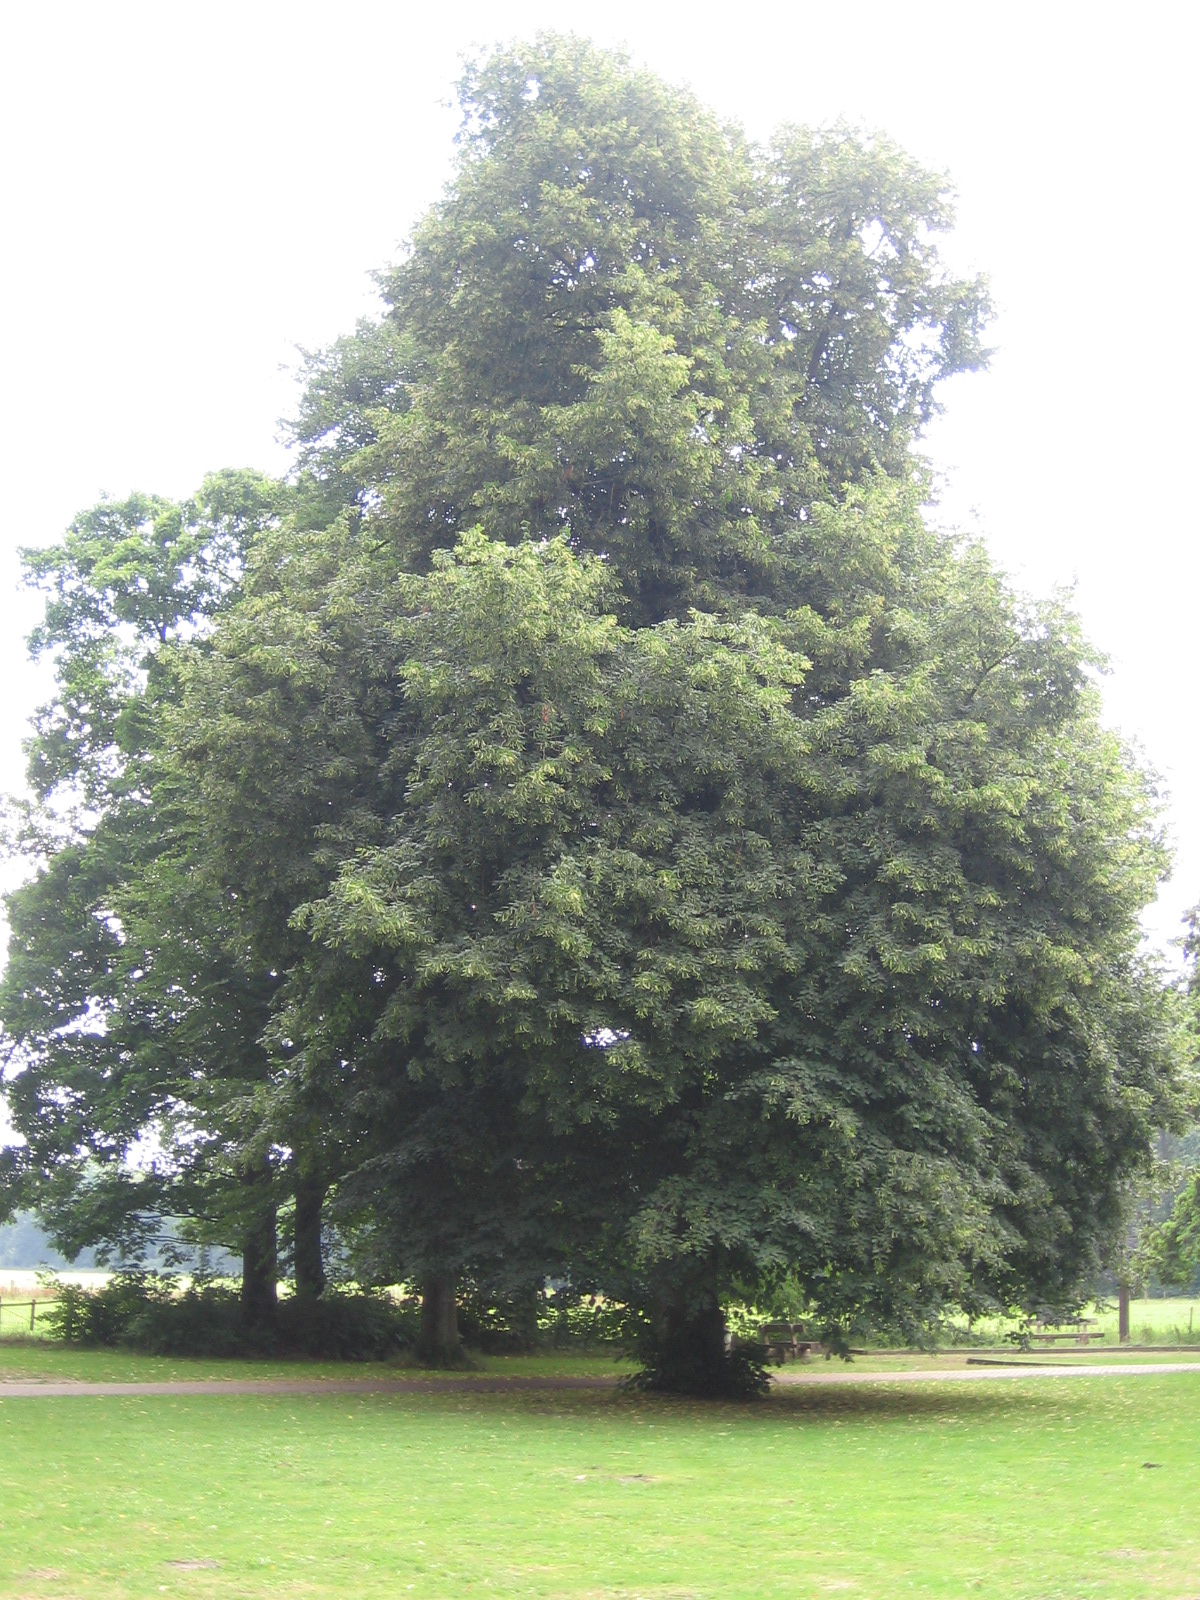 an enormous tree on a grassy field with a bench below